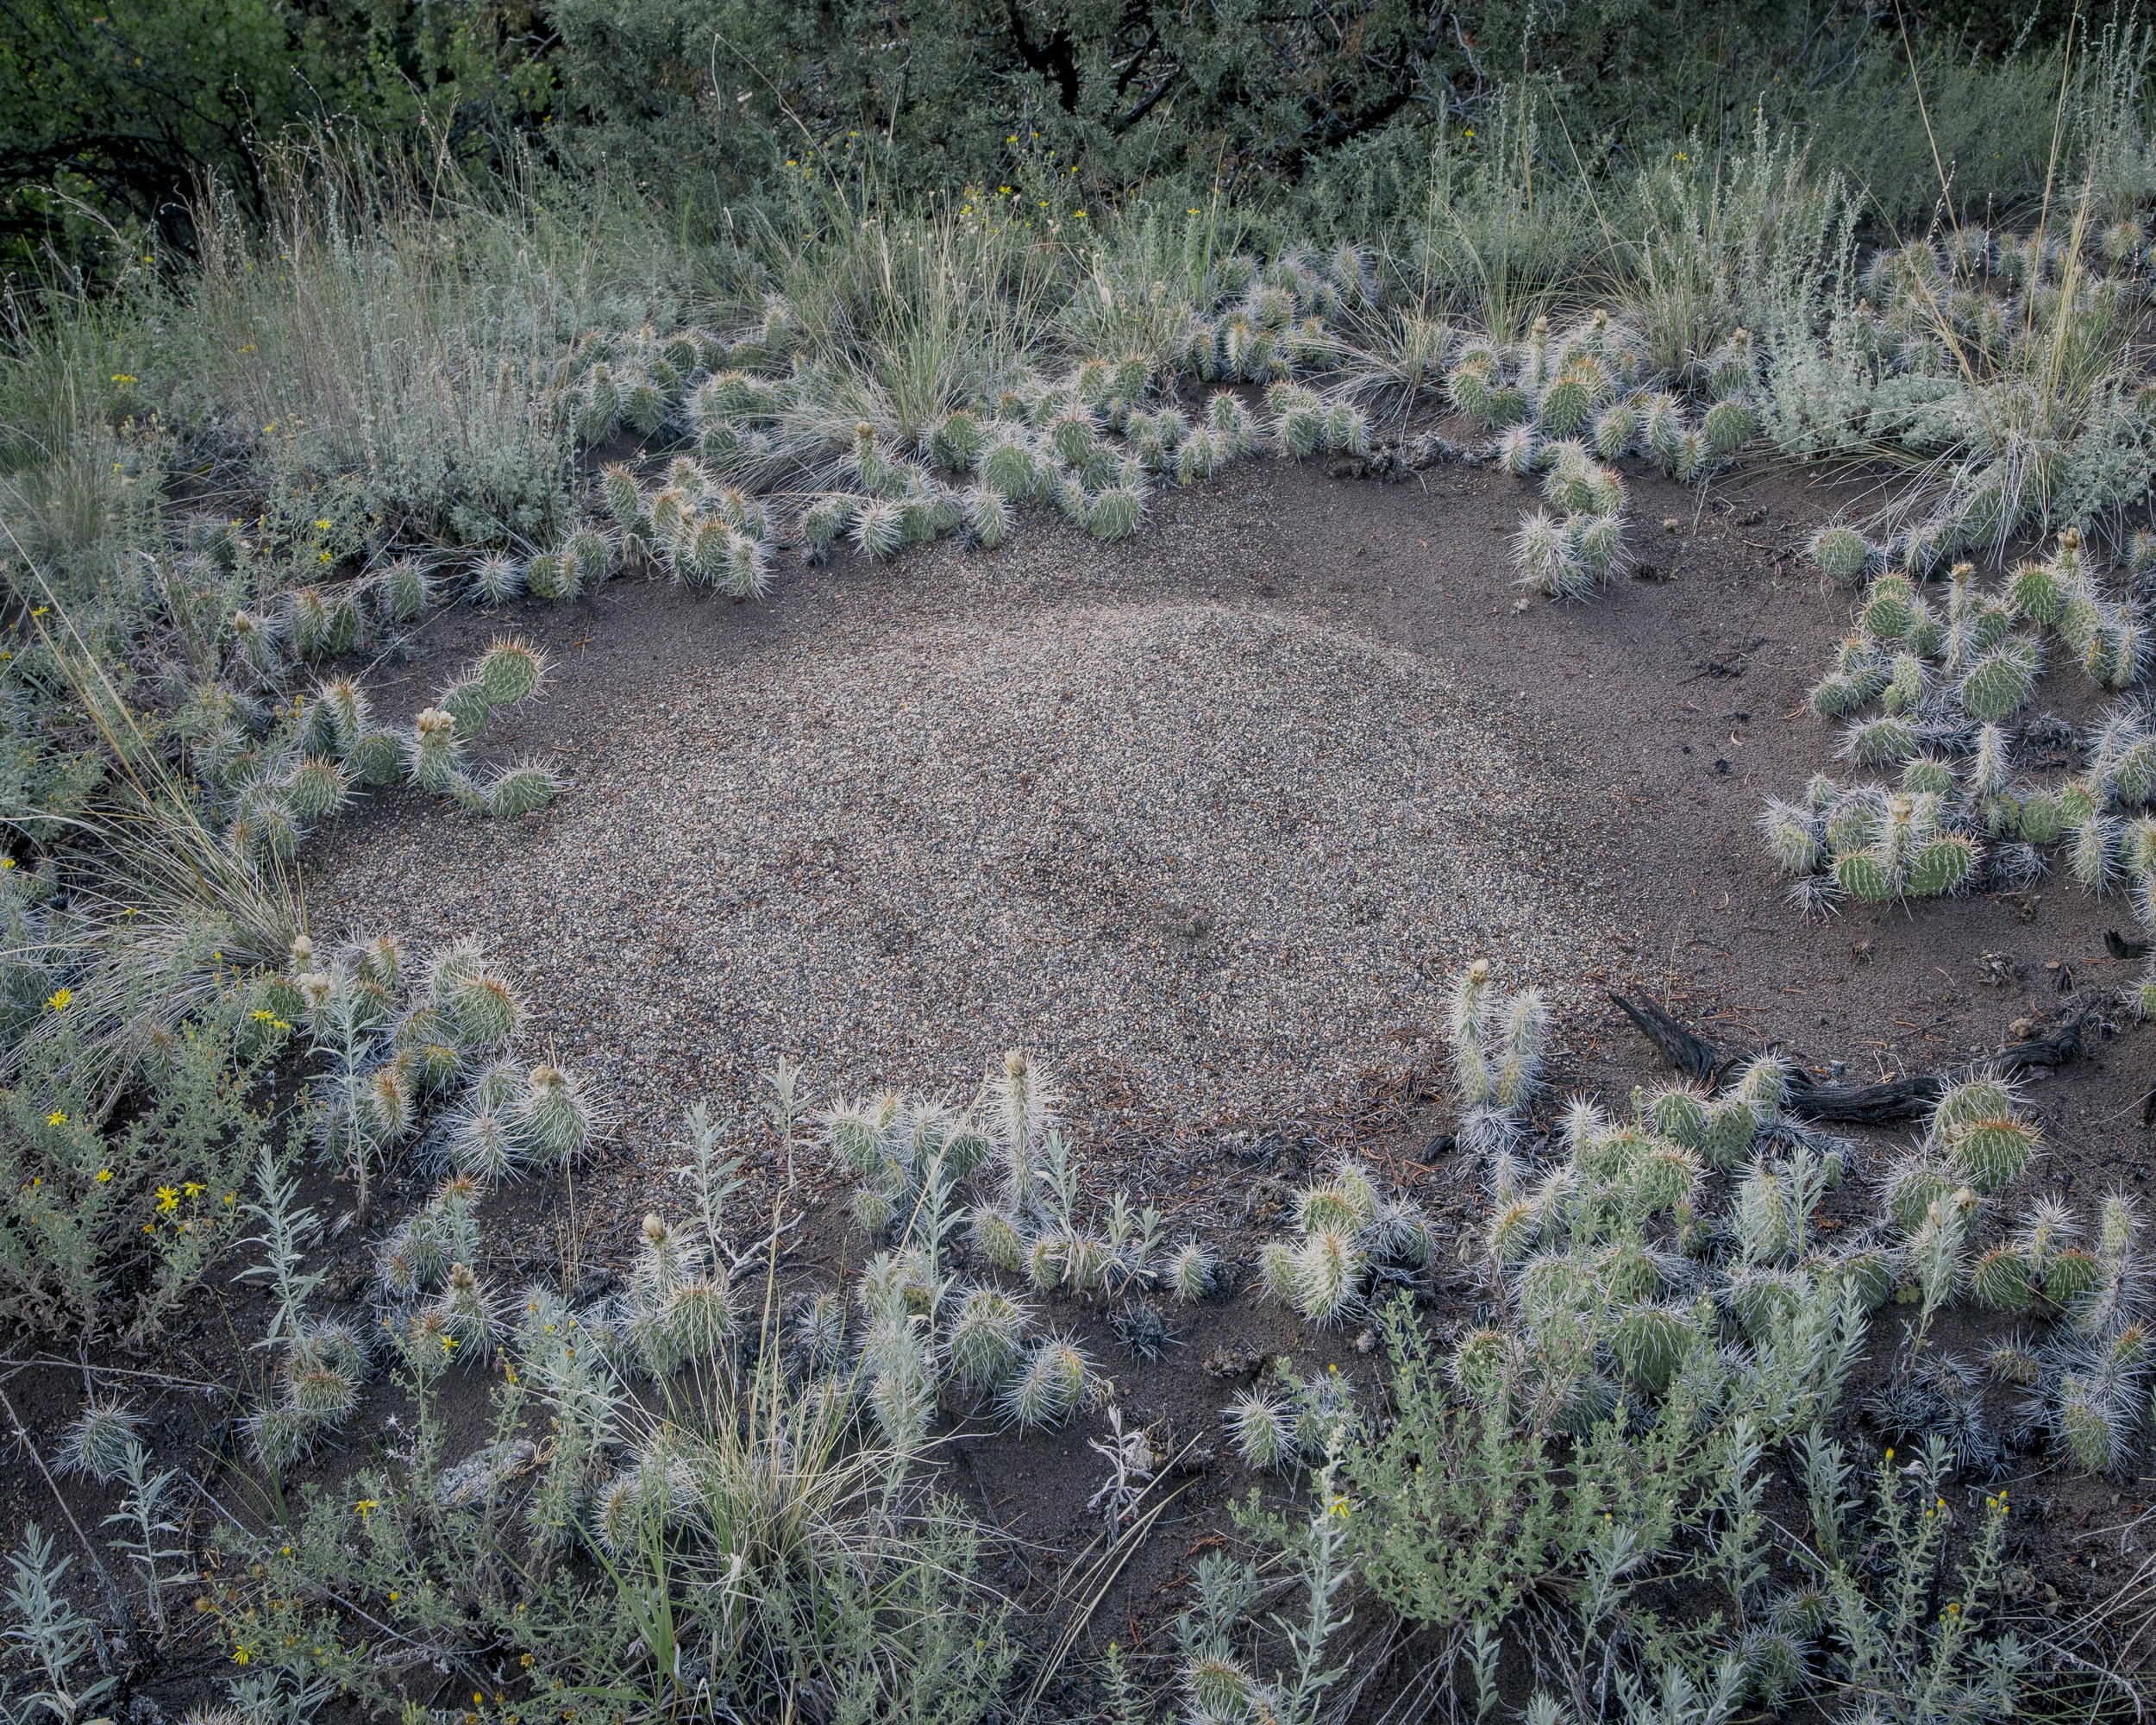  Ant hill with cacti. 